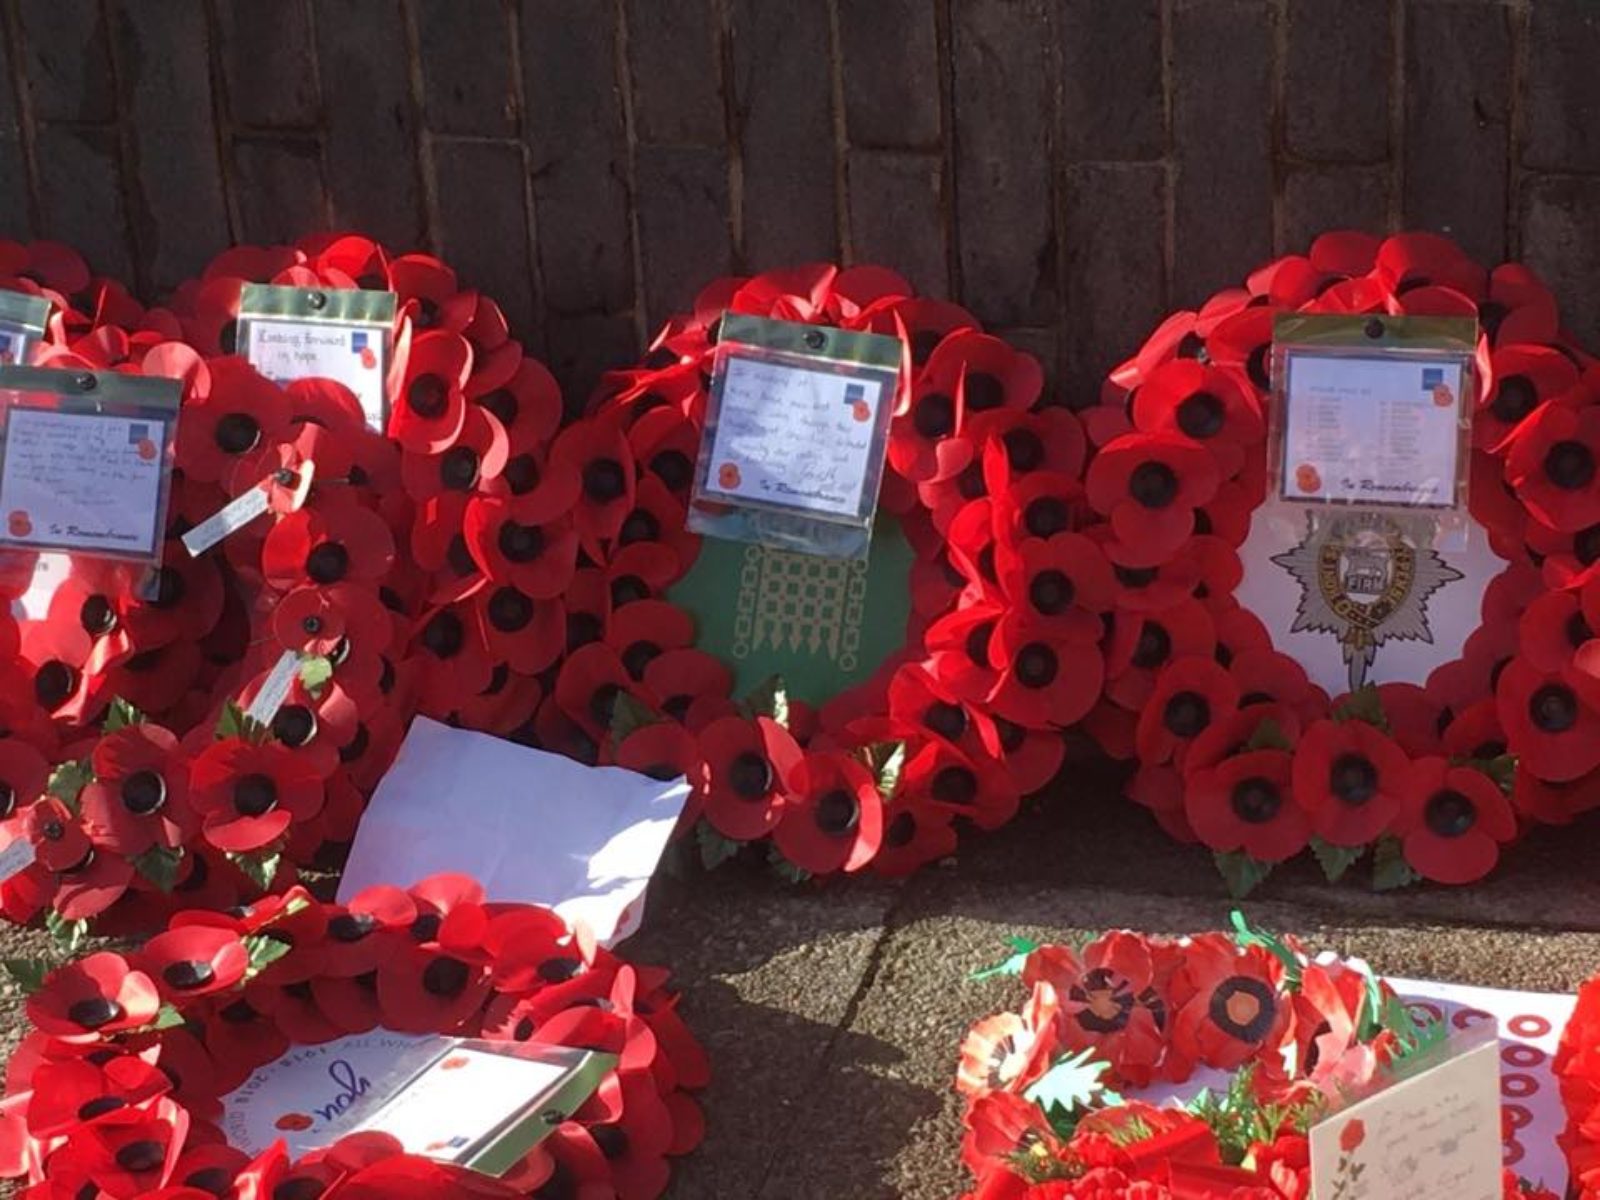 The wreaths for Remembrance Sunday